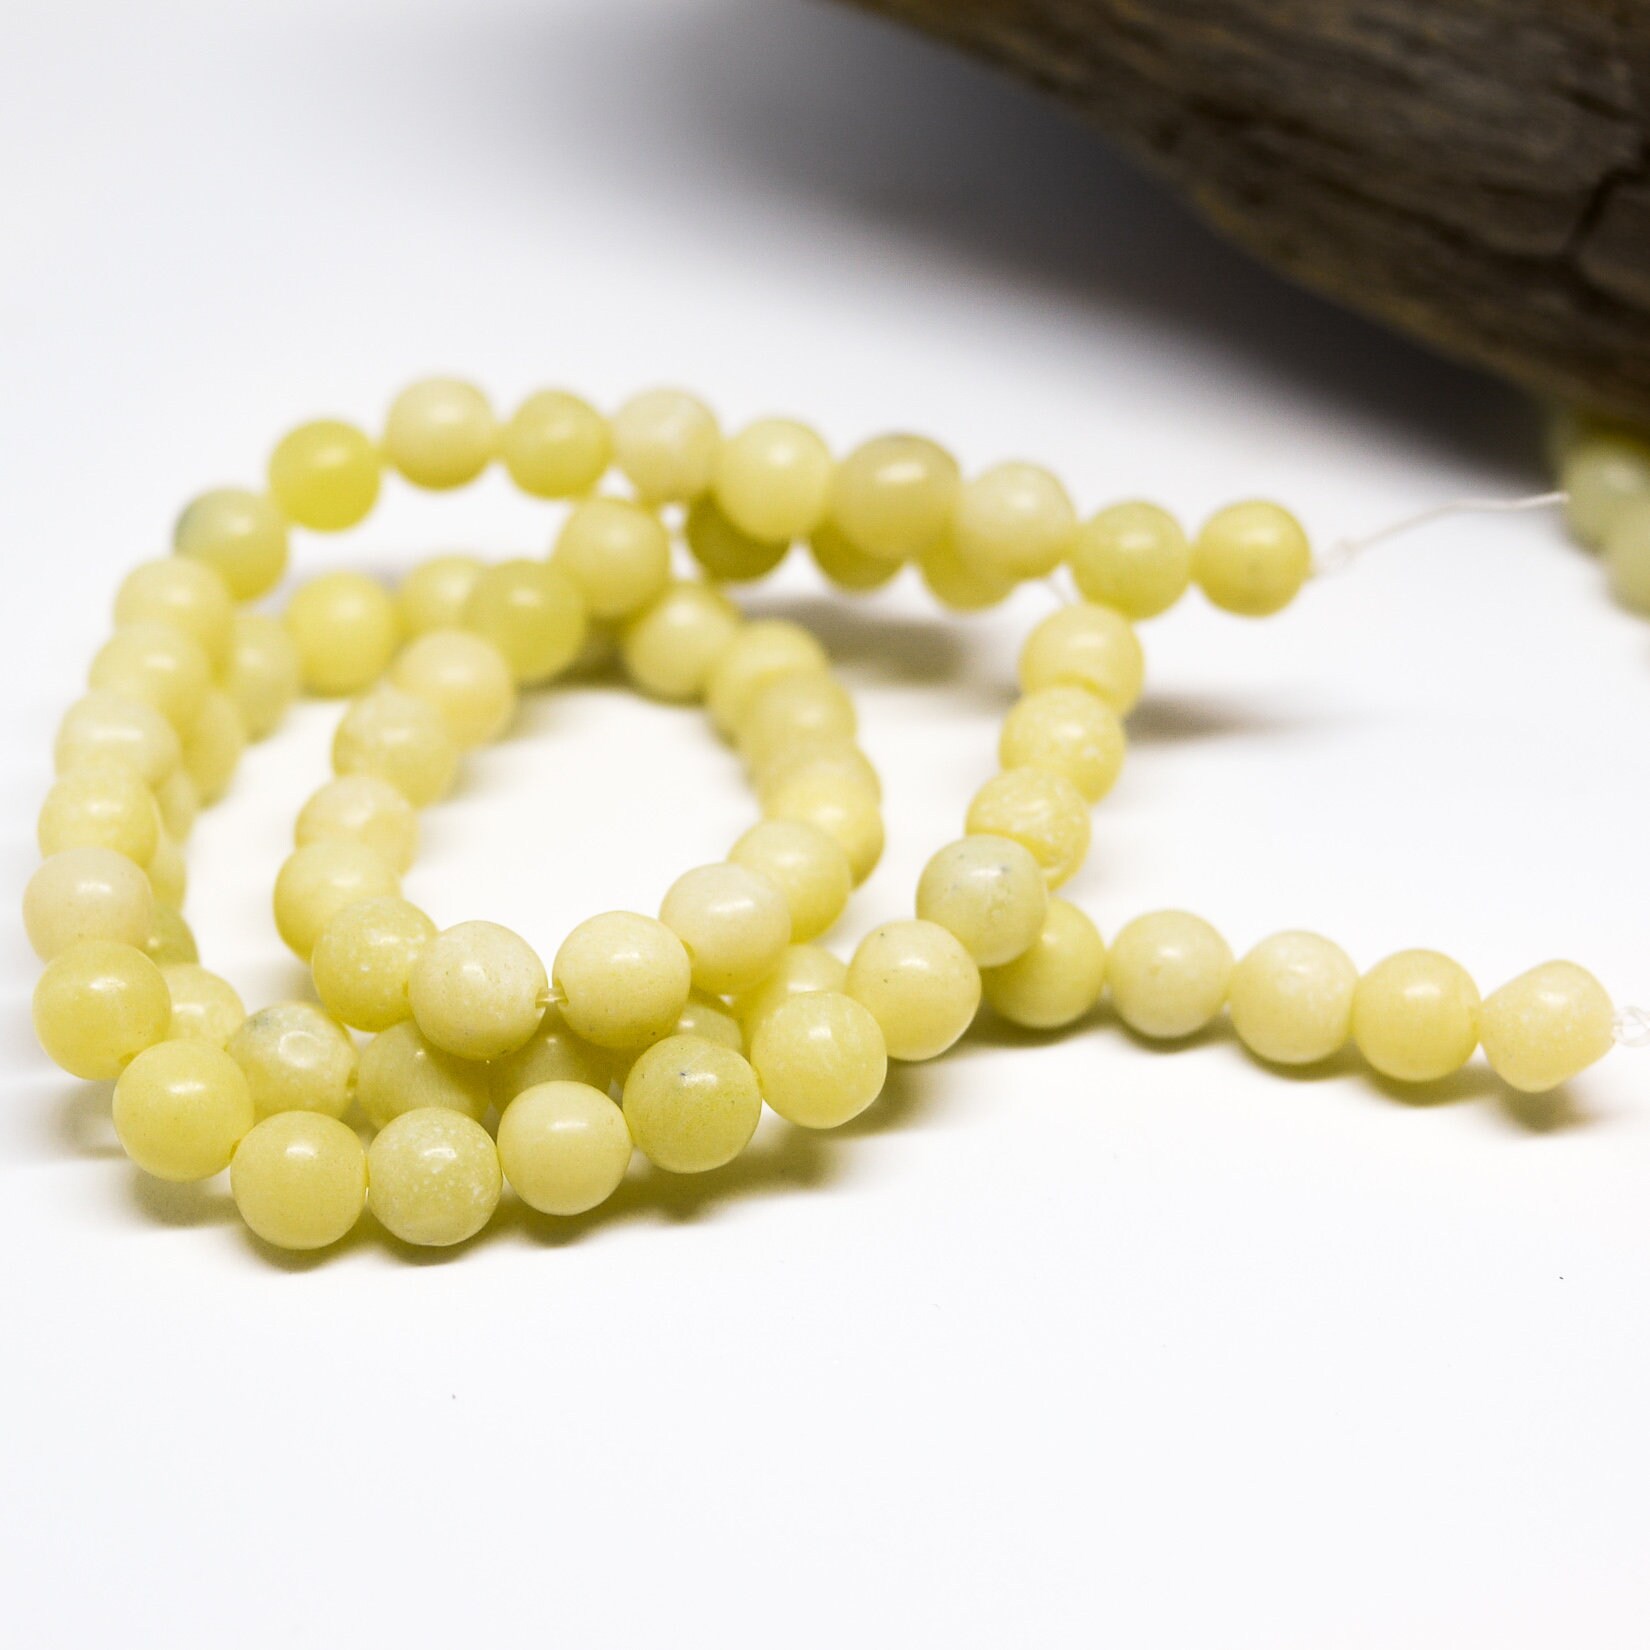 White Agate, 8mm Beads, White Beads, Jewelry Beads, Natural